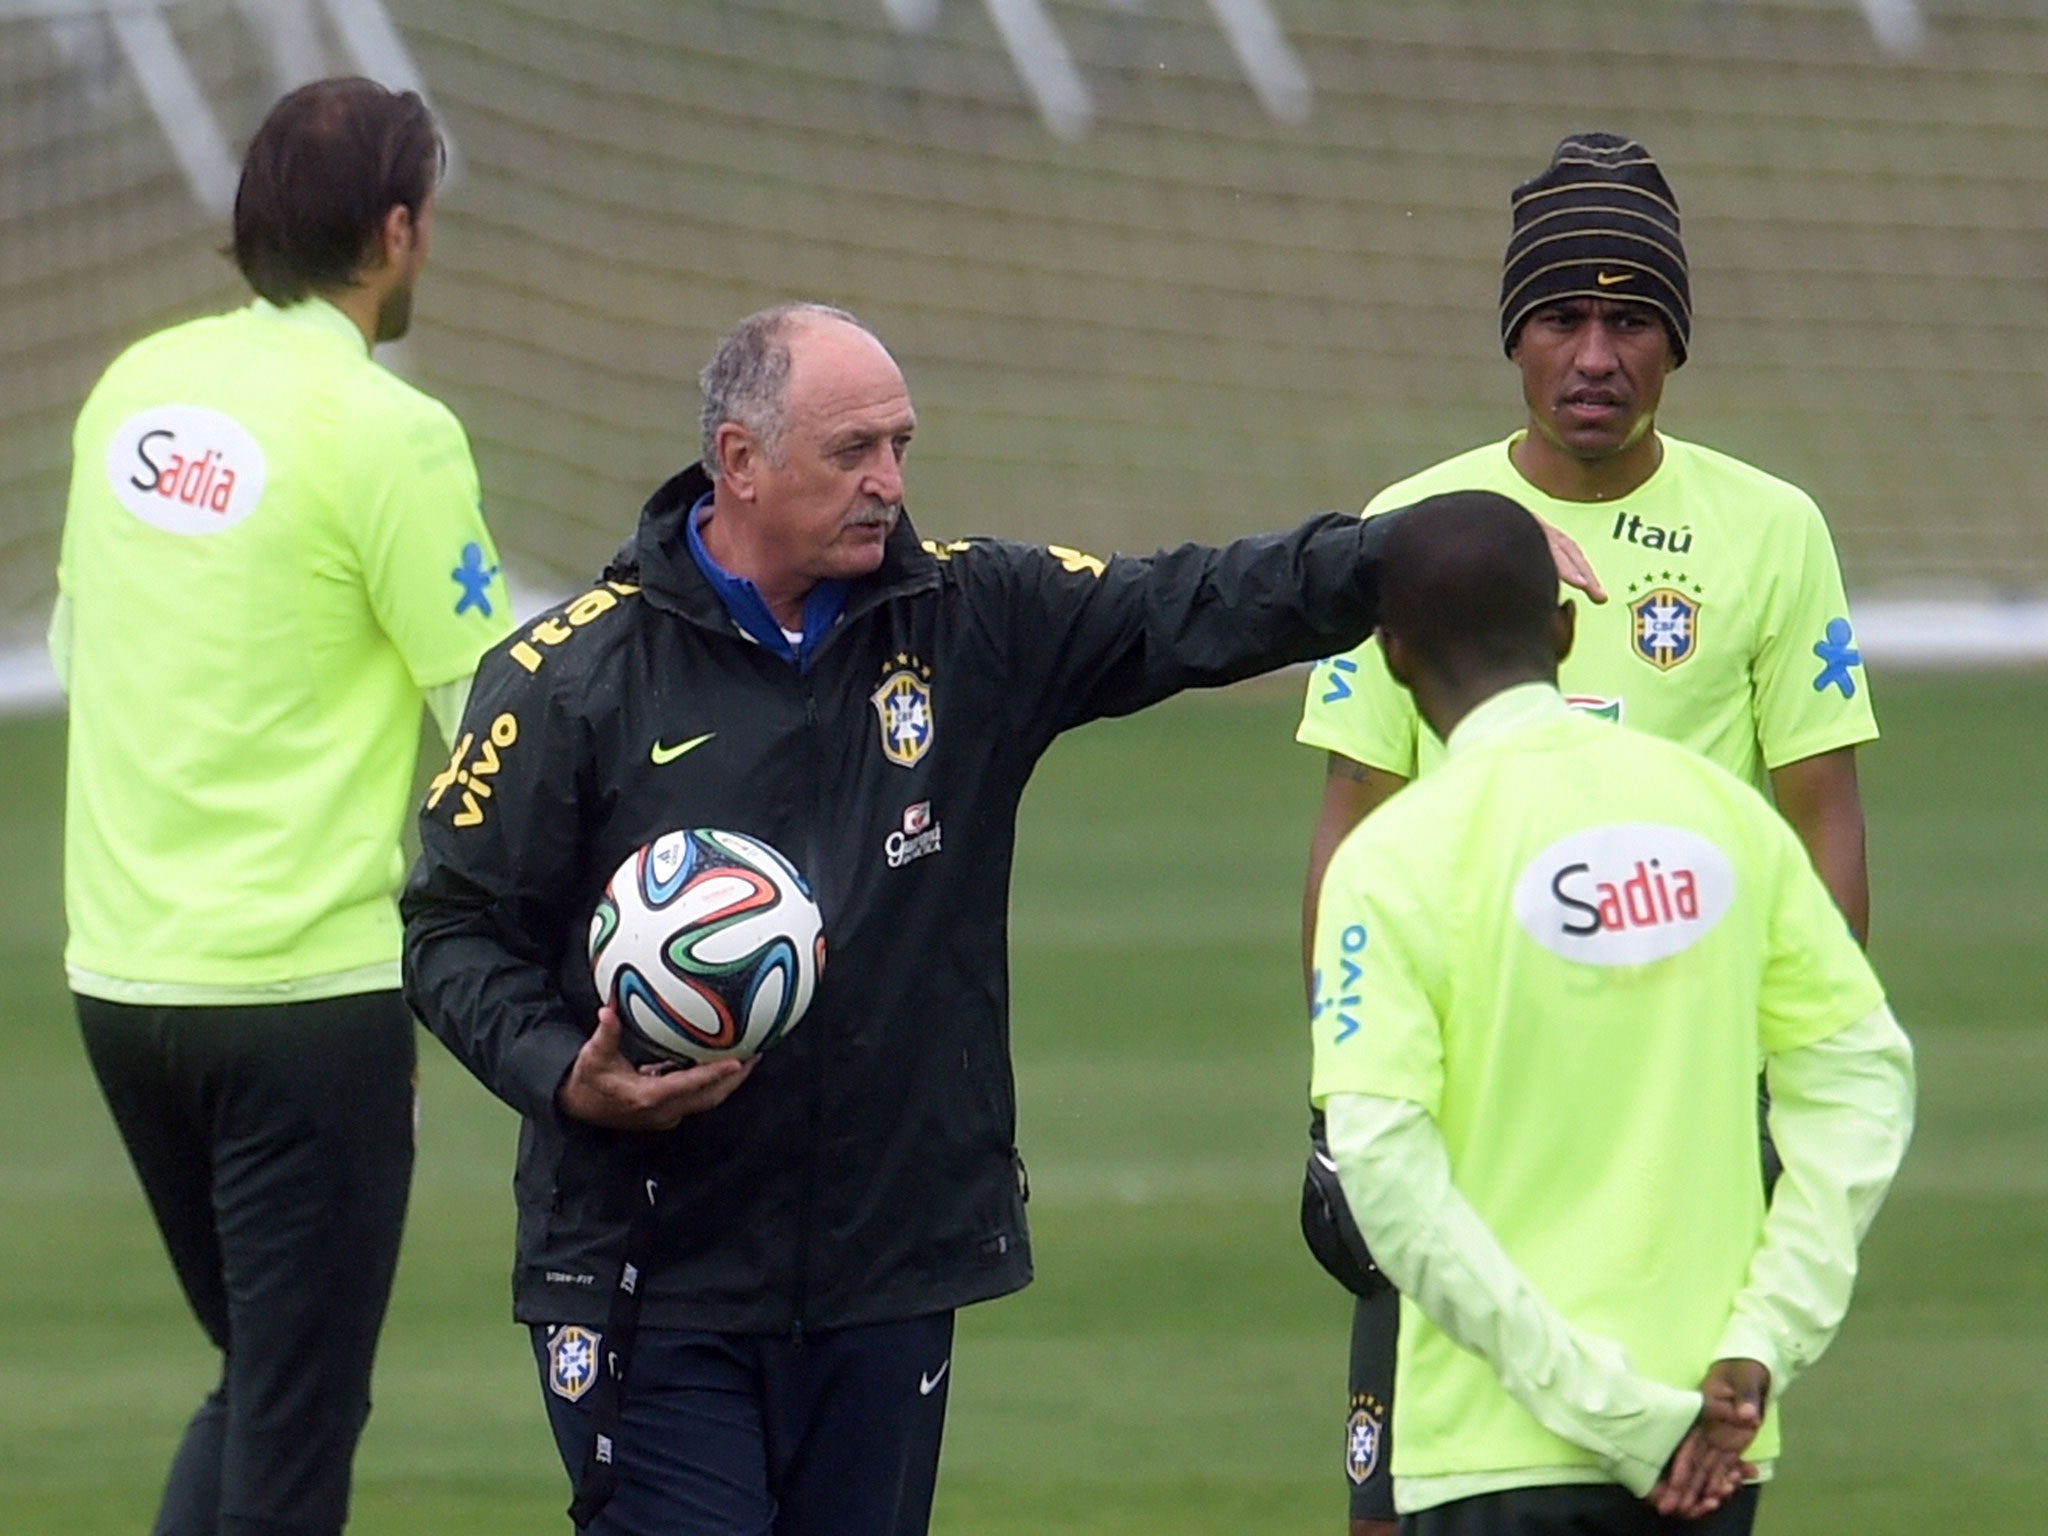 Brazil's coach Luiz Felipe Scolari speaks with players as they take part in a training session